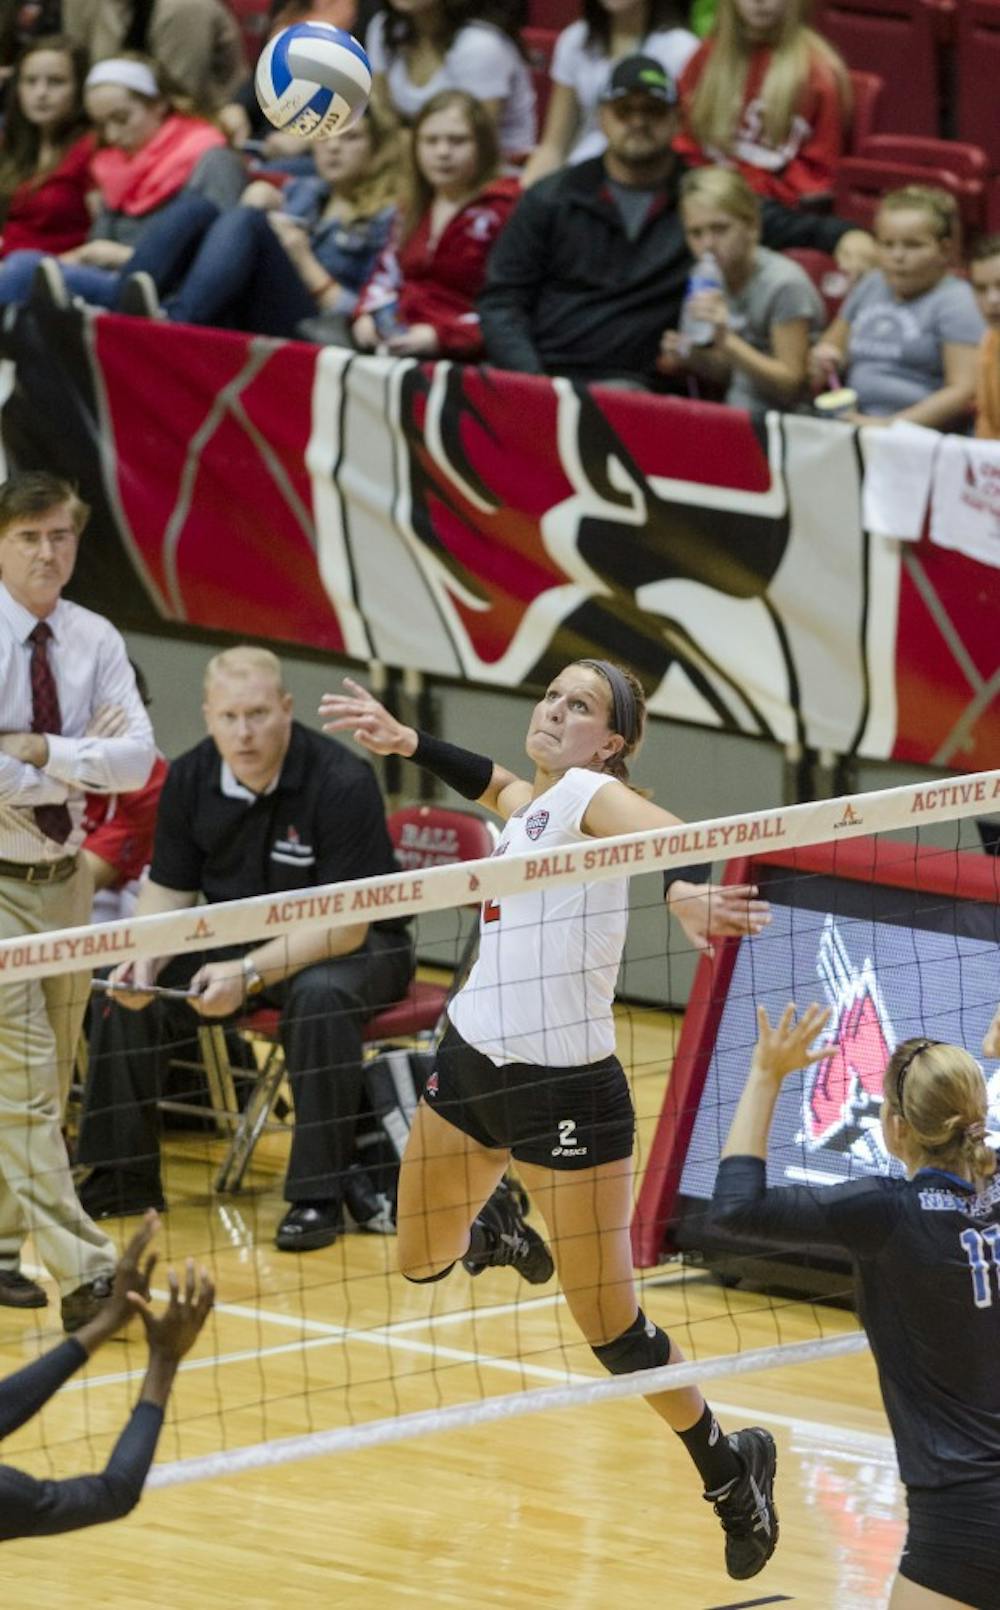 Sophomore outside hitter Alex Fuelling sends an attack over the net during the game against Buffalo on Oct. 5 in Worthen Arena. Fuelling took 14 kills out of an attempted 27 leading to a Ball State sweep of 3-0. DN PHOTO COREY OHLENKAMP